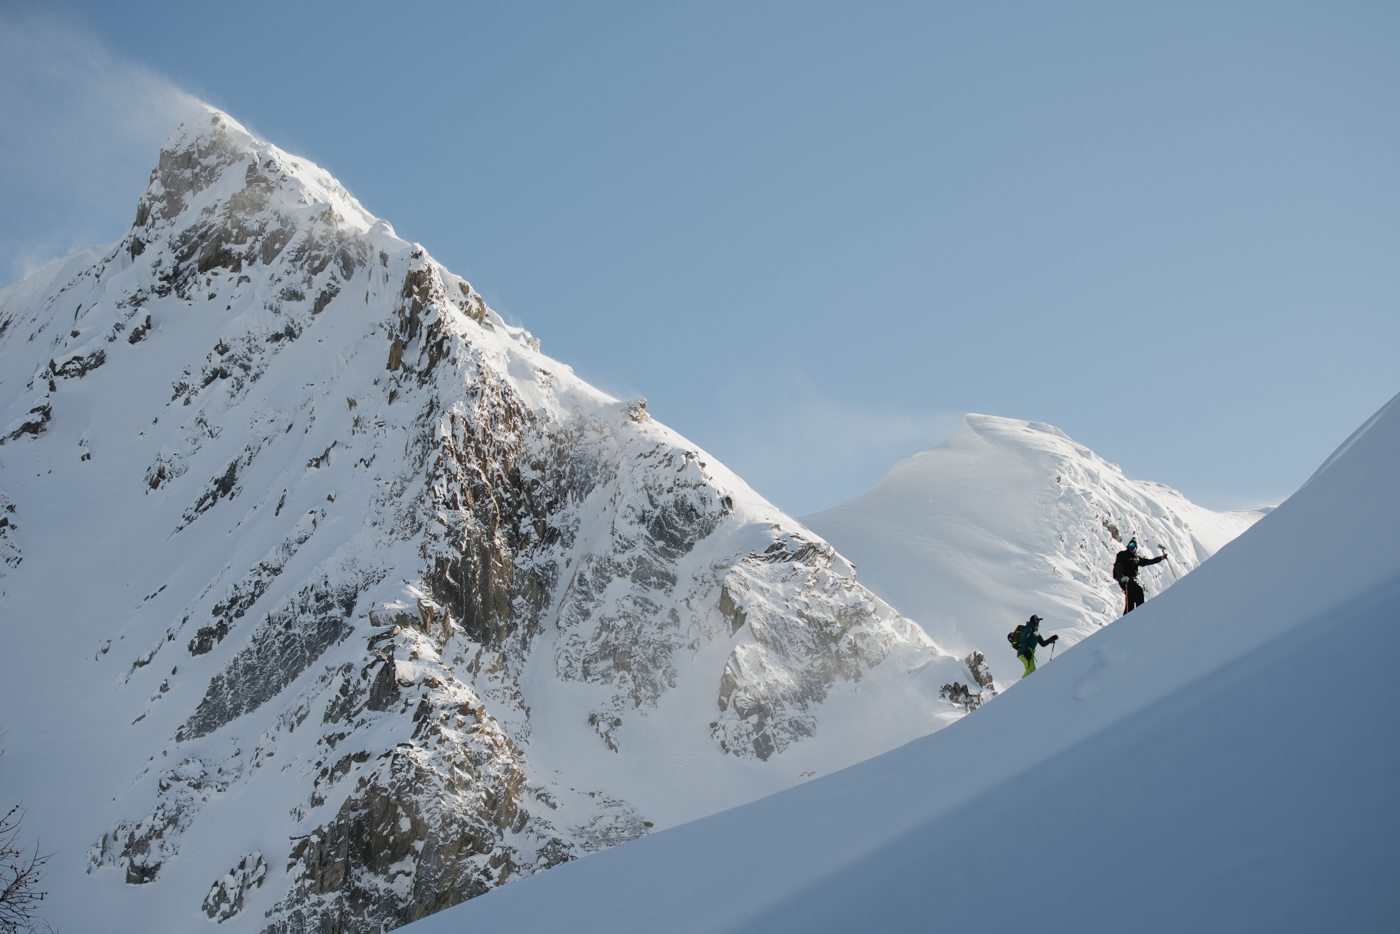 BALANCING ACT: Leah Evans and Seb Barlerin ascend the Jumbo Pass ridgeline, bearing north towards the Strabird and Jumbo Glaciers. Part of the Central Purcells, this massif is the geographical divide between the East and West Kootenay, as well as Jumbo and Glacier Creeks.